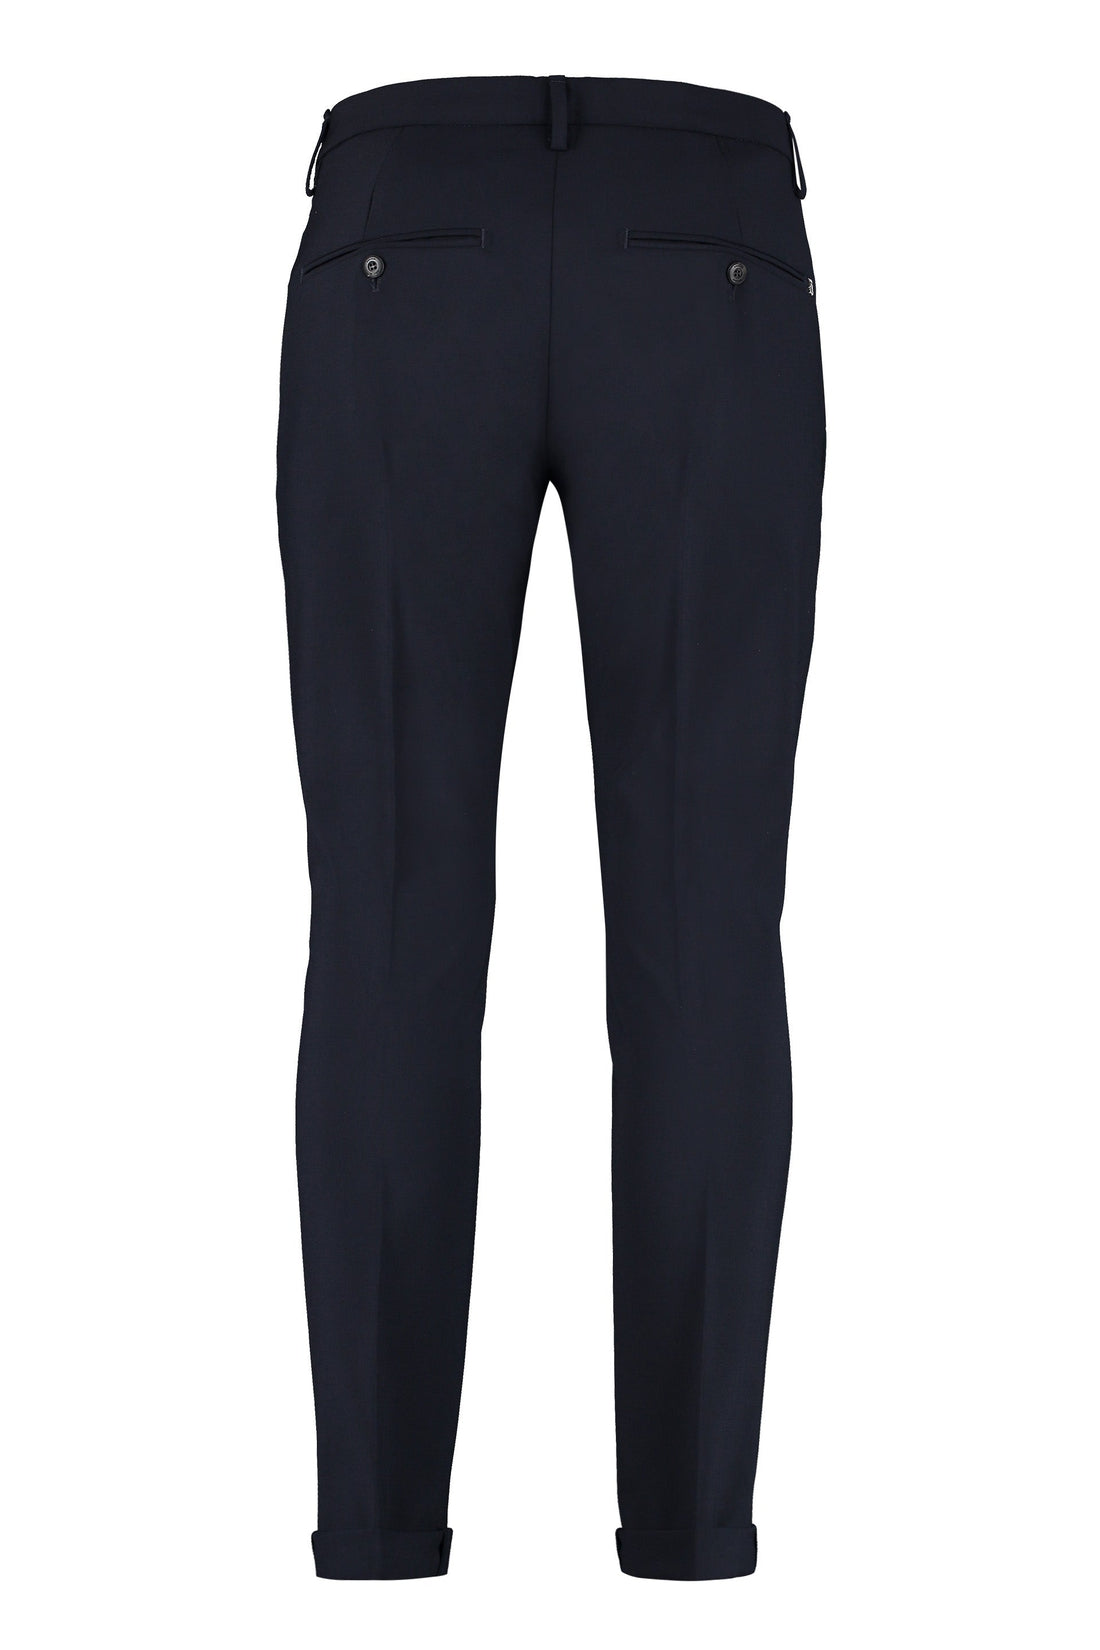 Dondup-OUTLET-SALE-Tailored trousers-ARCHIVIST